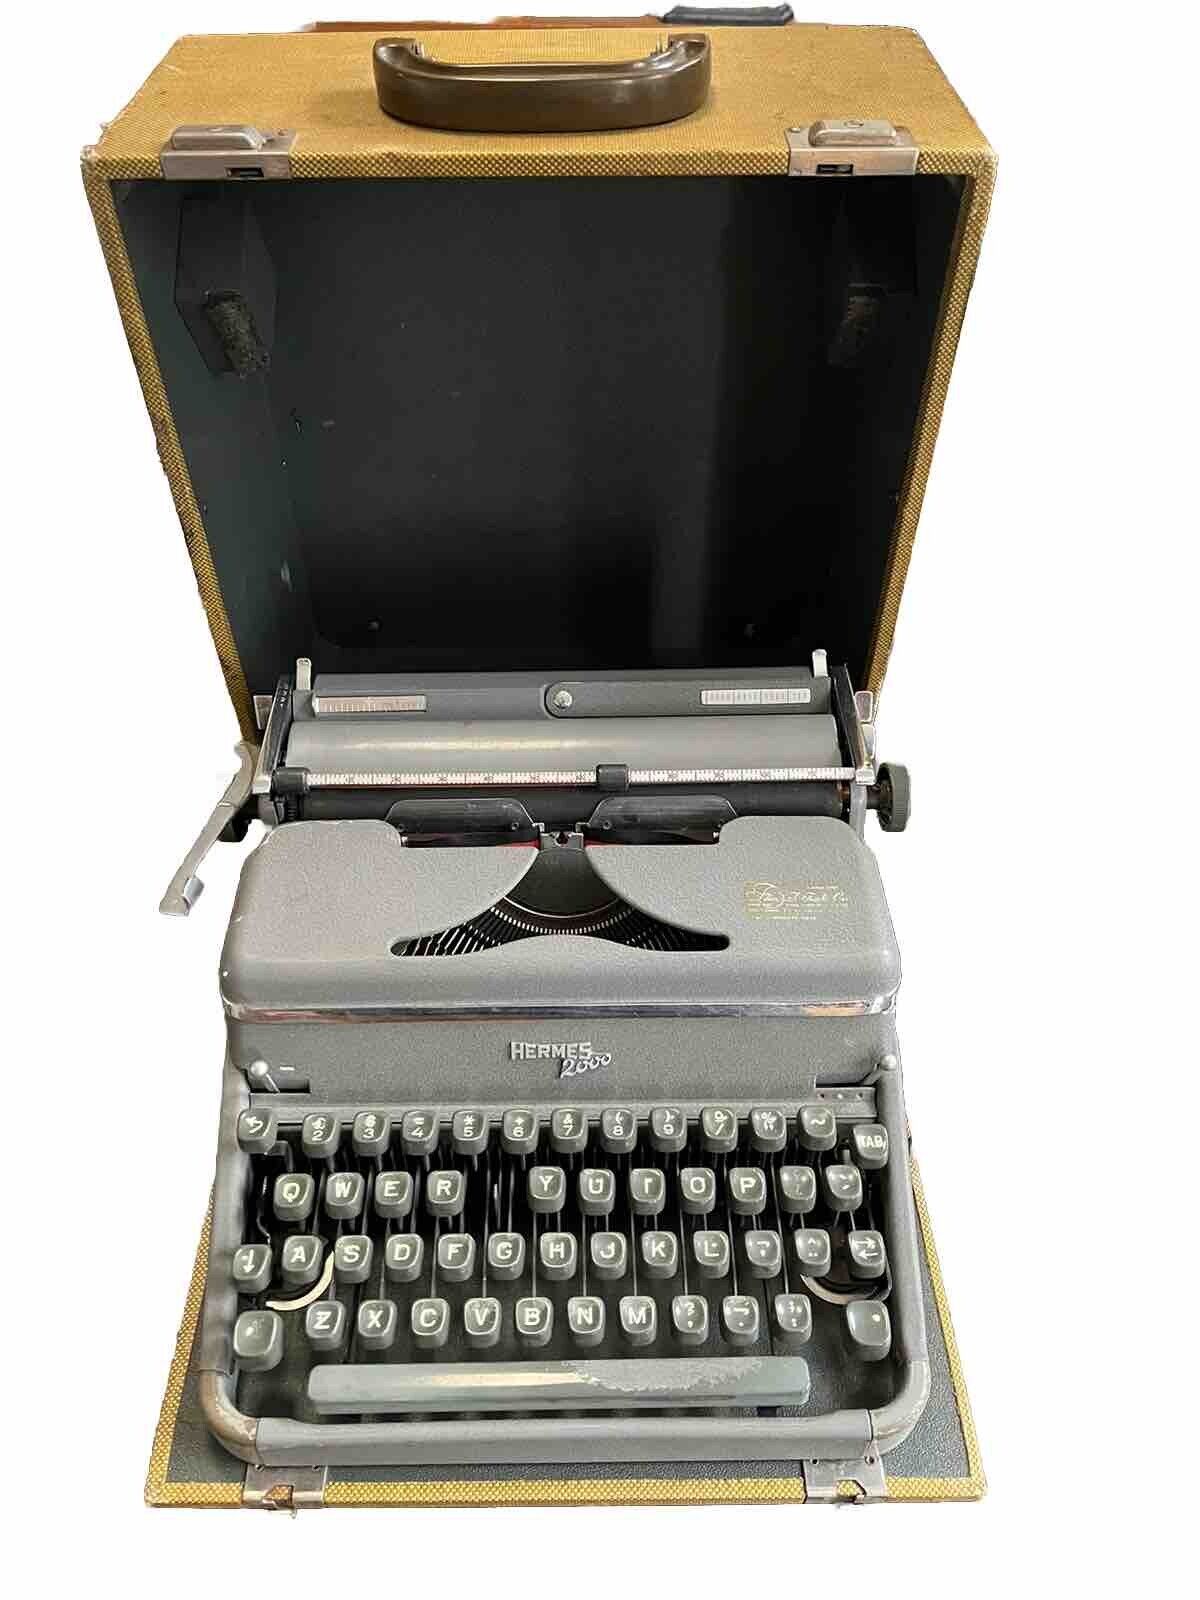 Vintage HERMES 2000 Portable Mid Century Manual Typewriter with Carrying Case